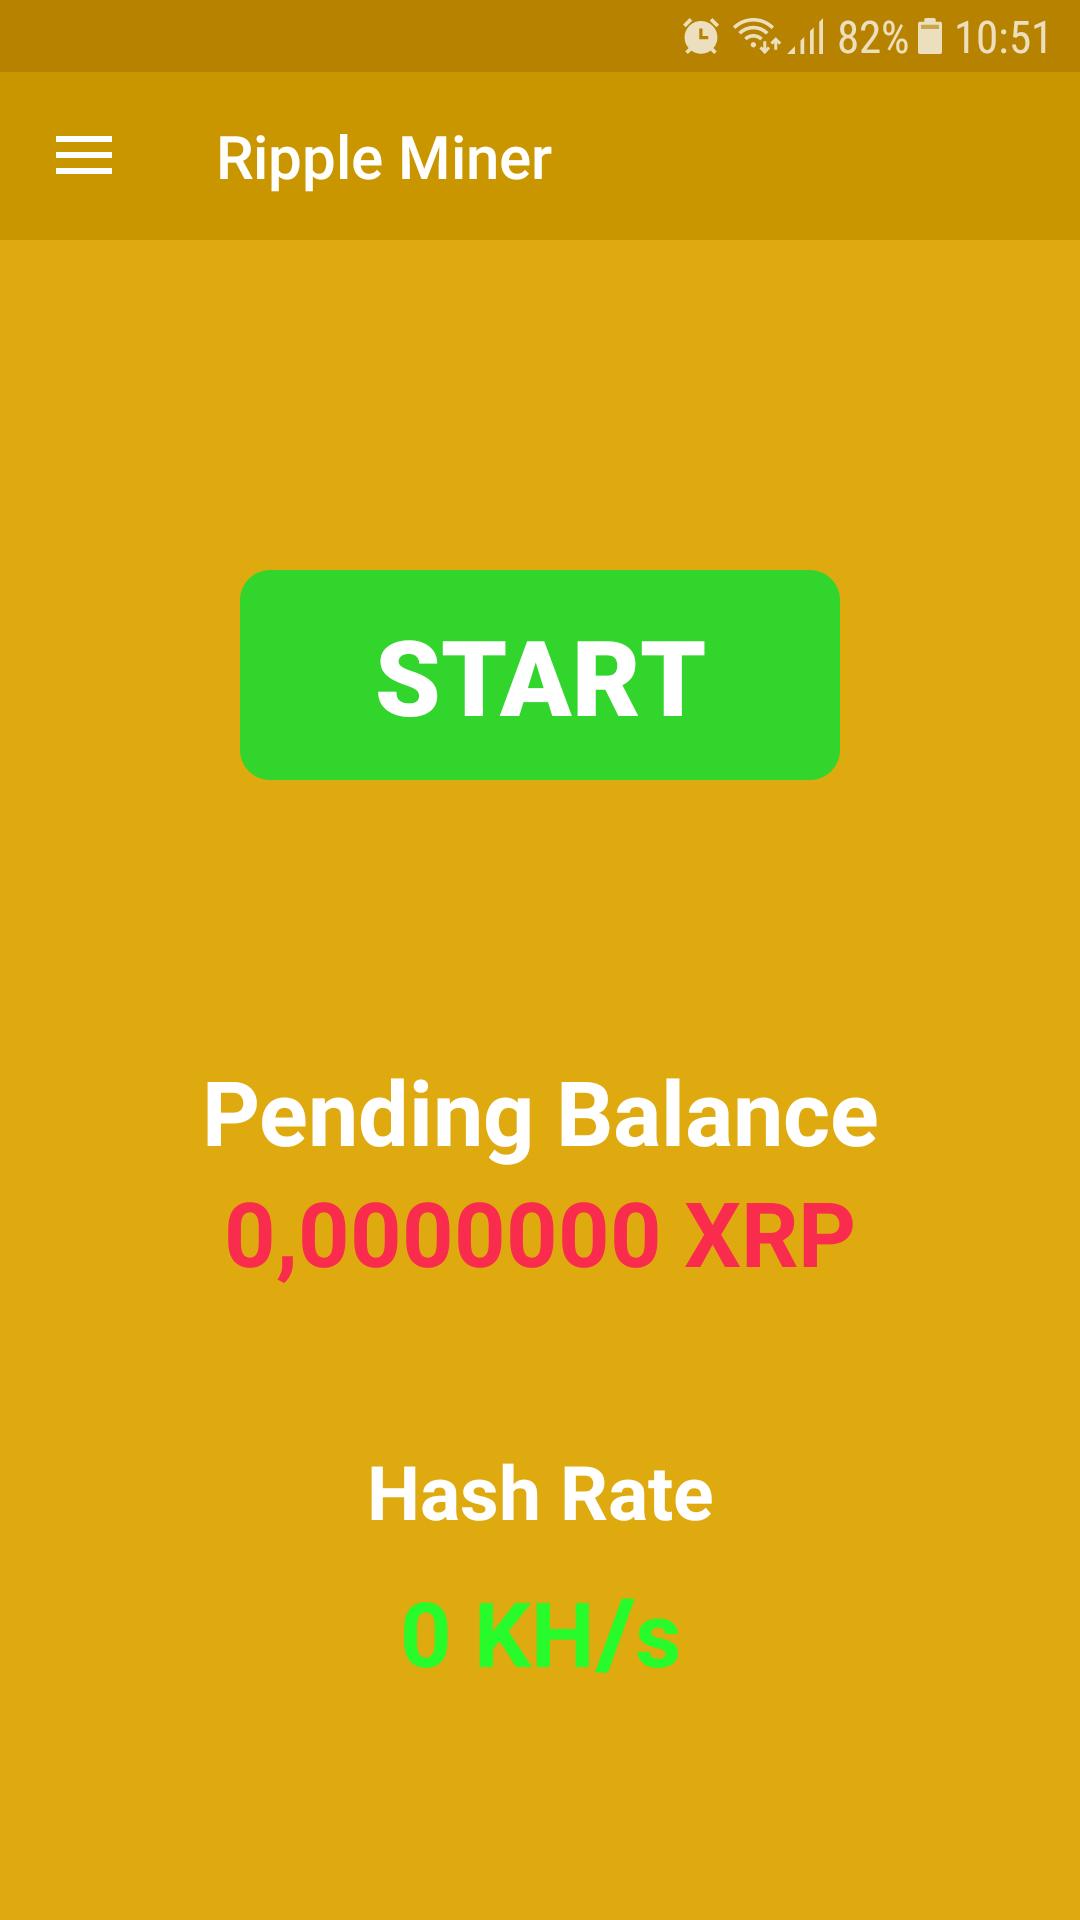 XRPMINER - Ripple Mining and Miner APK - cryptolove.funer APK Download